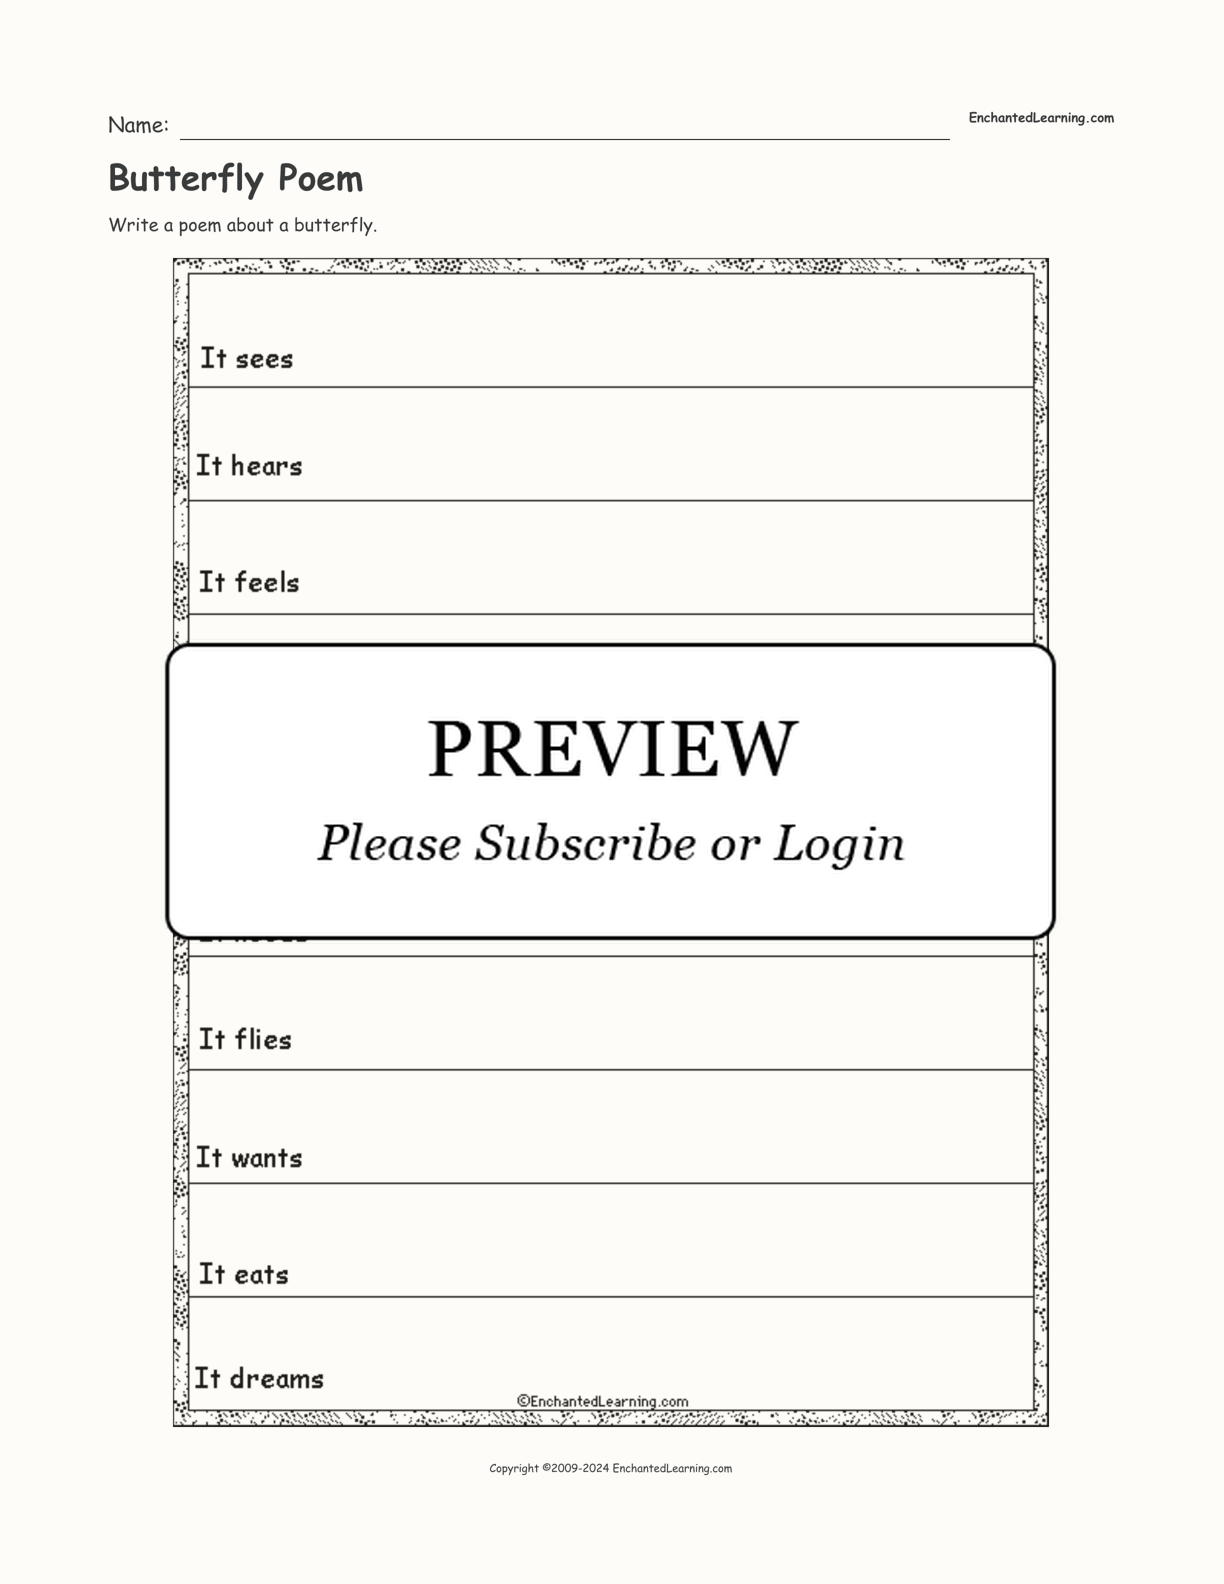 Butterfly Poem interactive worksheet page 1